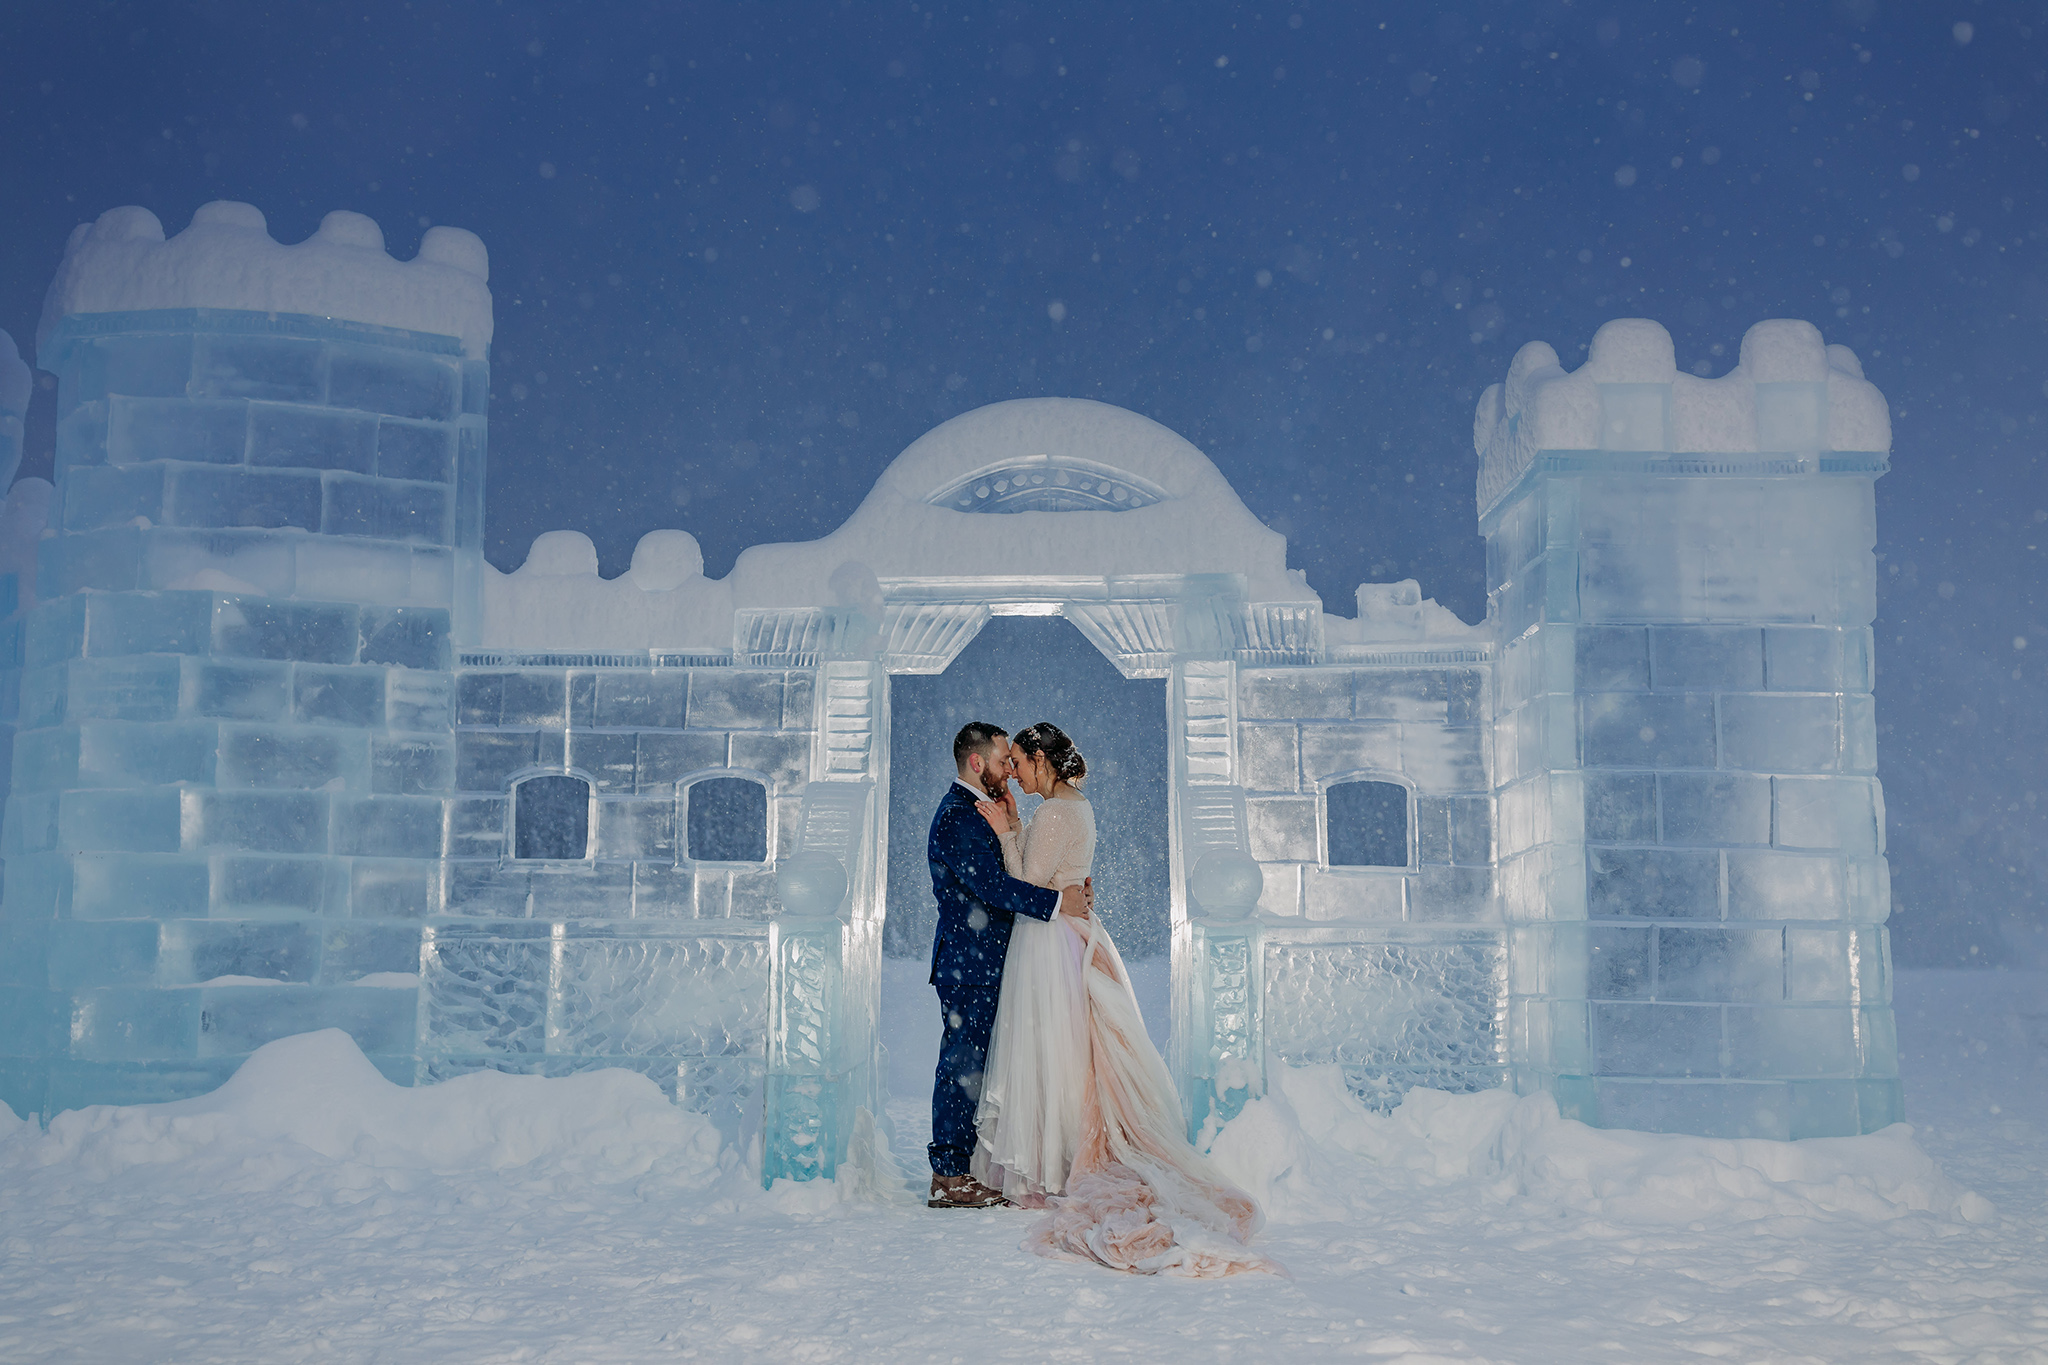 Elope in Lake Louise with magical snowy outdoor winter wonderland wedding photos at the Fairmont Chateau Lake Louise Ice Castle at Twilight